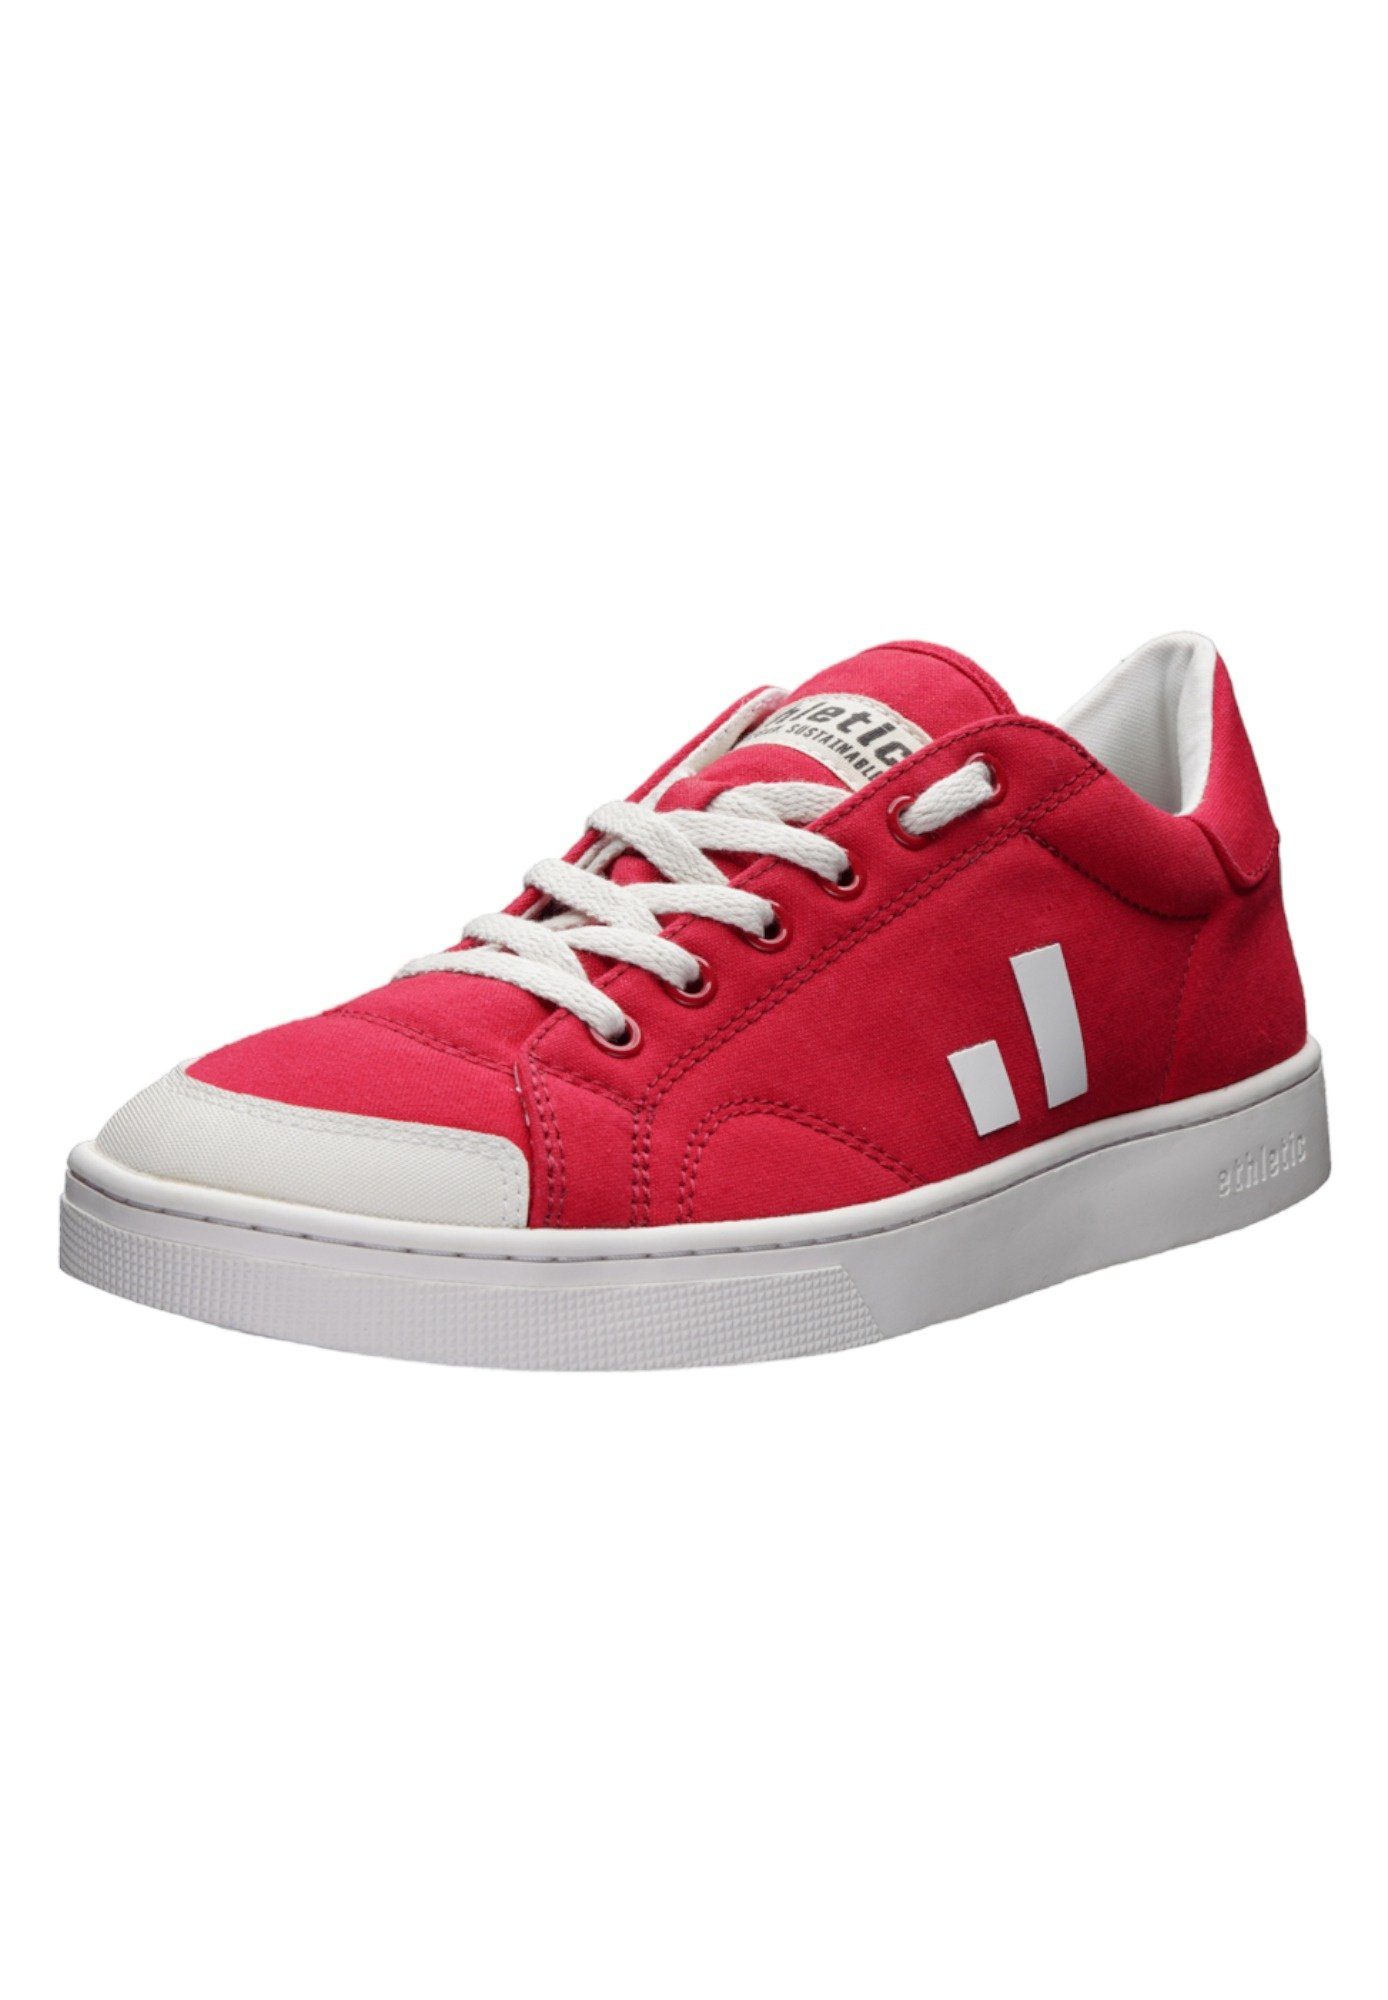 Cranberry ETHLETIC Sneaker Fairtrade - White Cut Red Lo Just Active Produkt